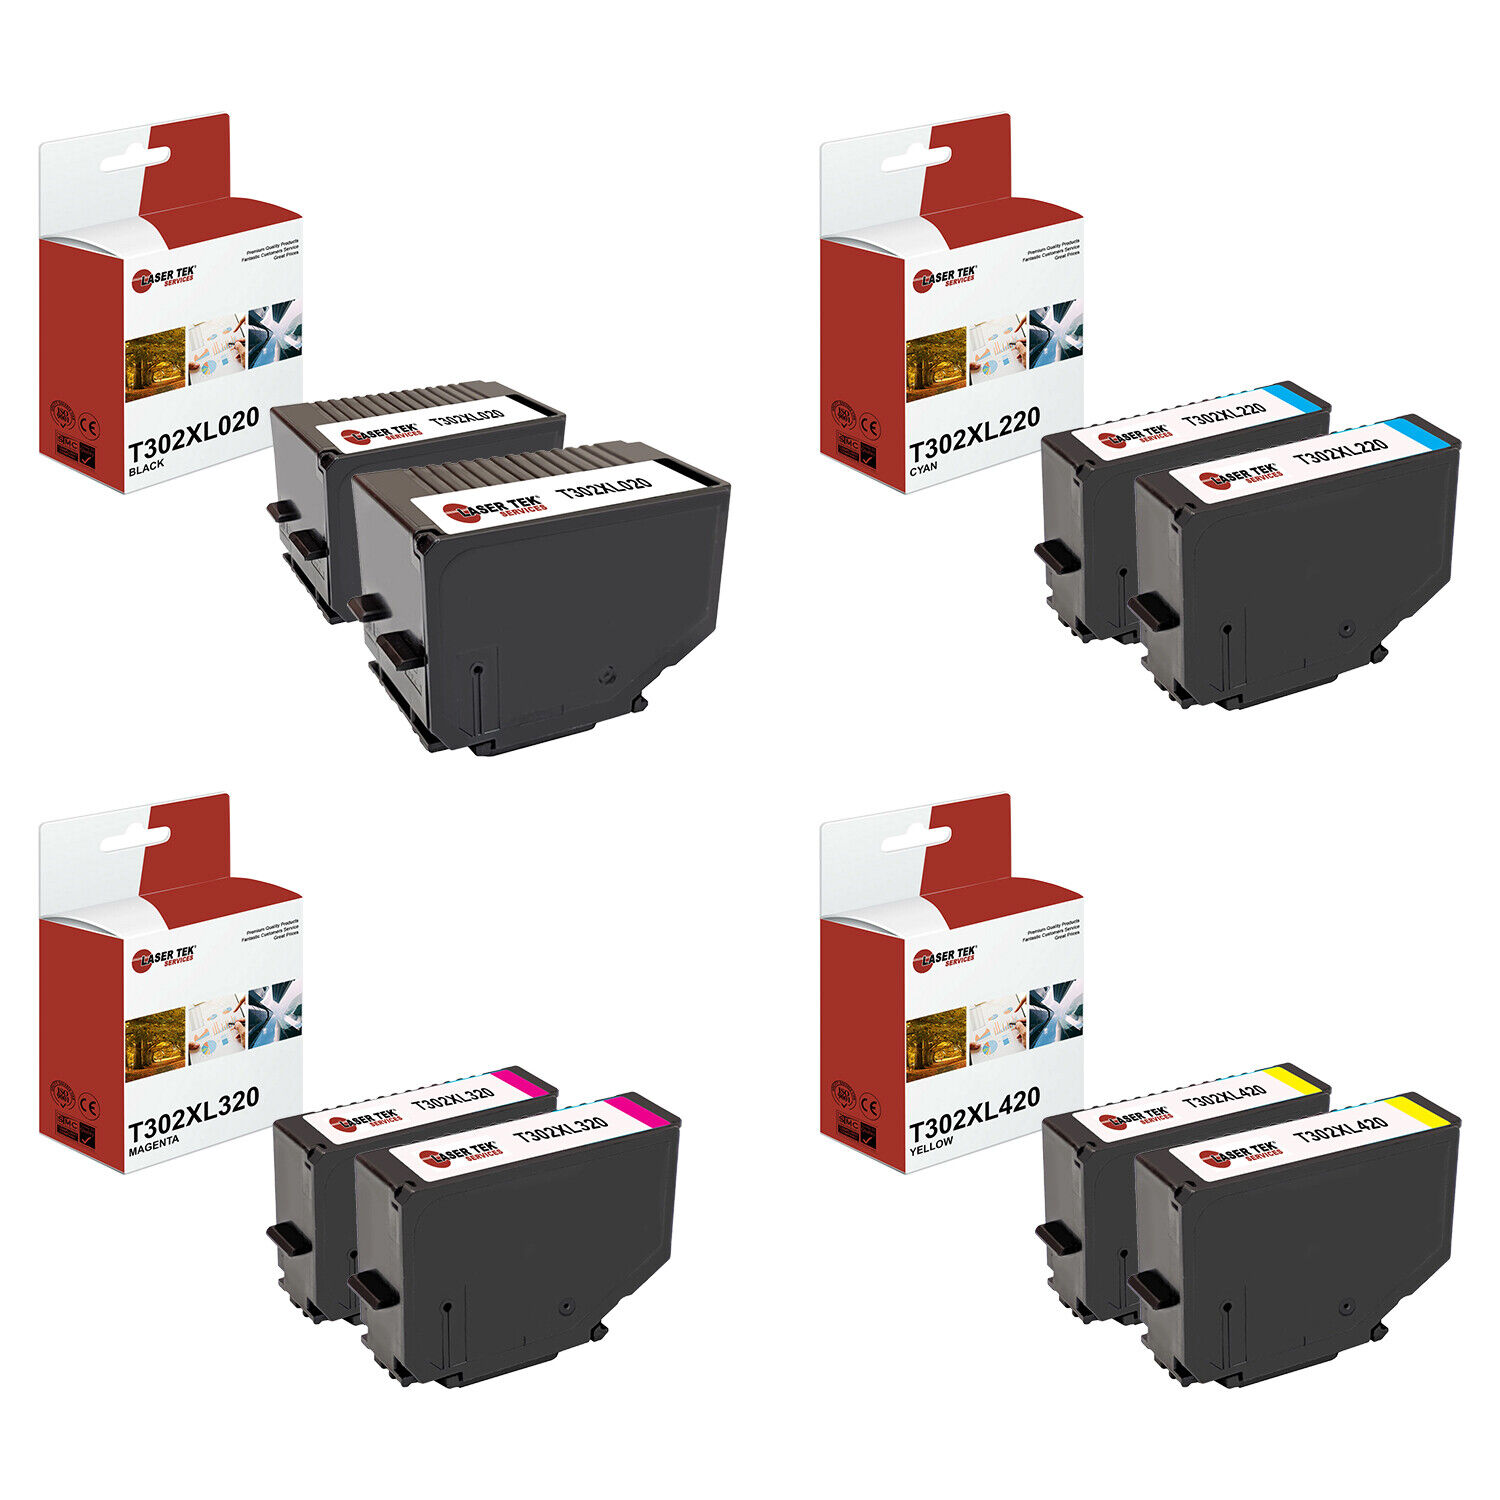 8Pk LTS 302XL BCMY HY Remanufactured for Epson Expression Premium XP-6000 Ink